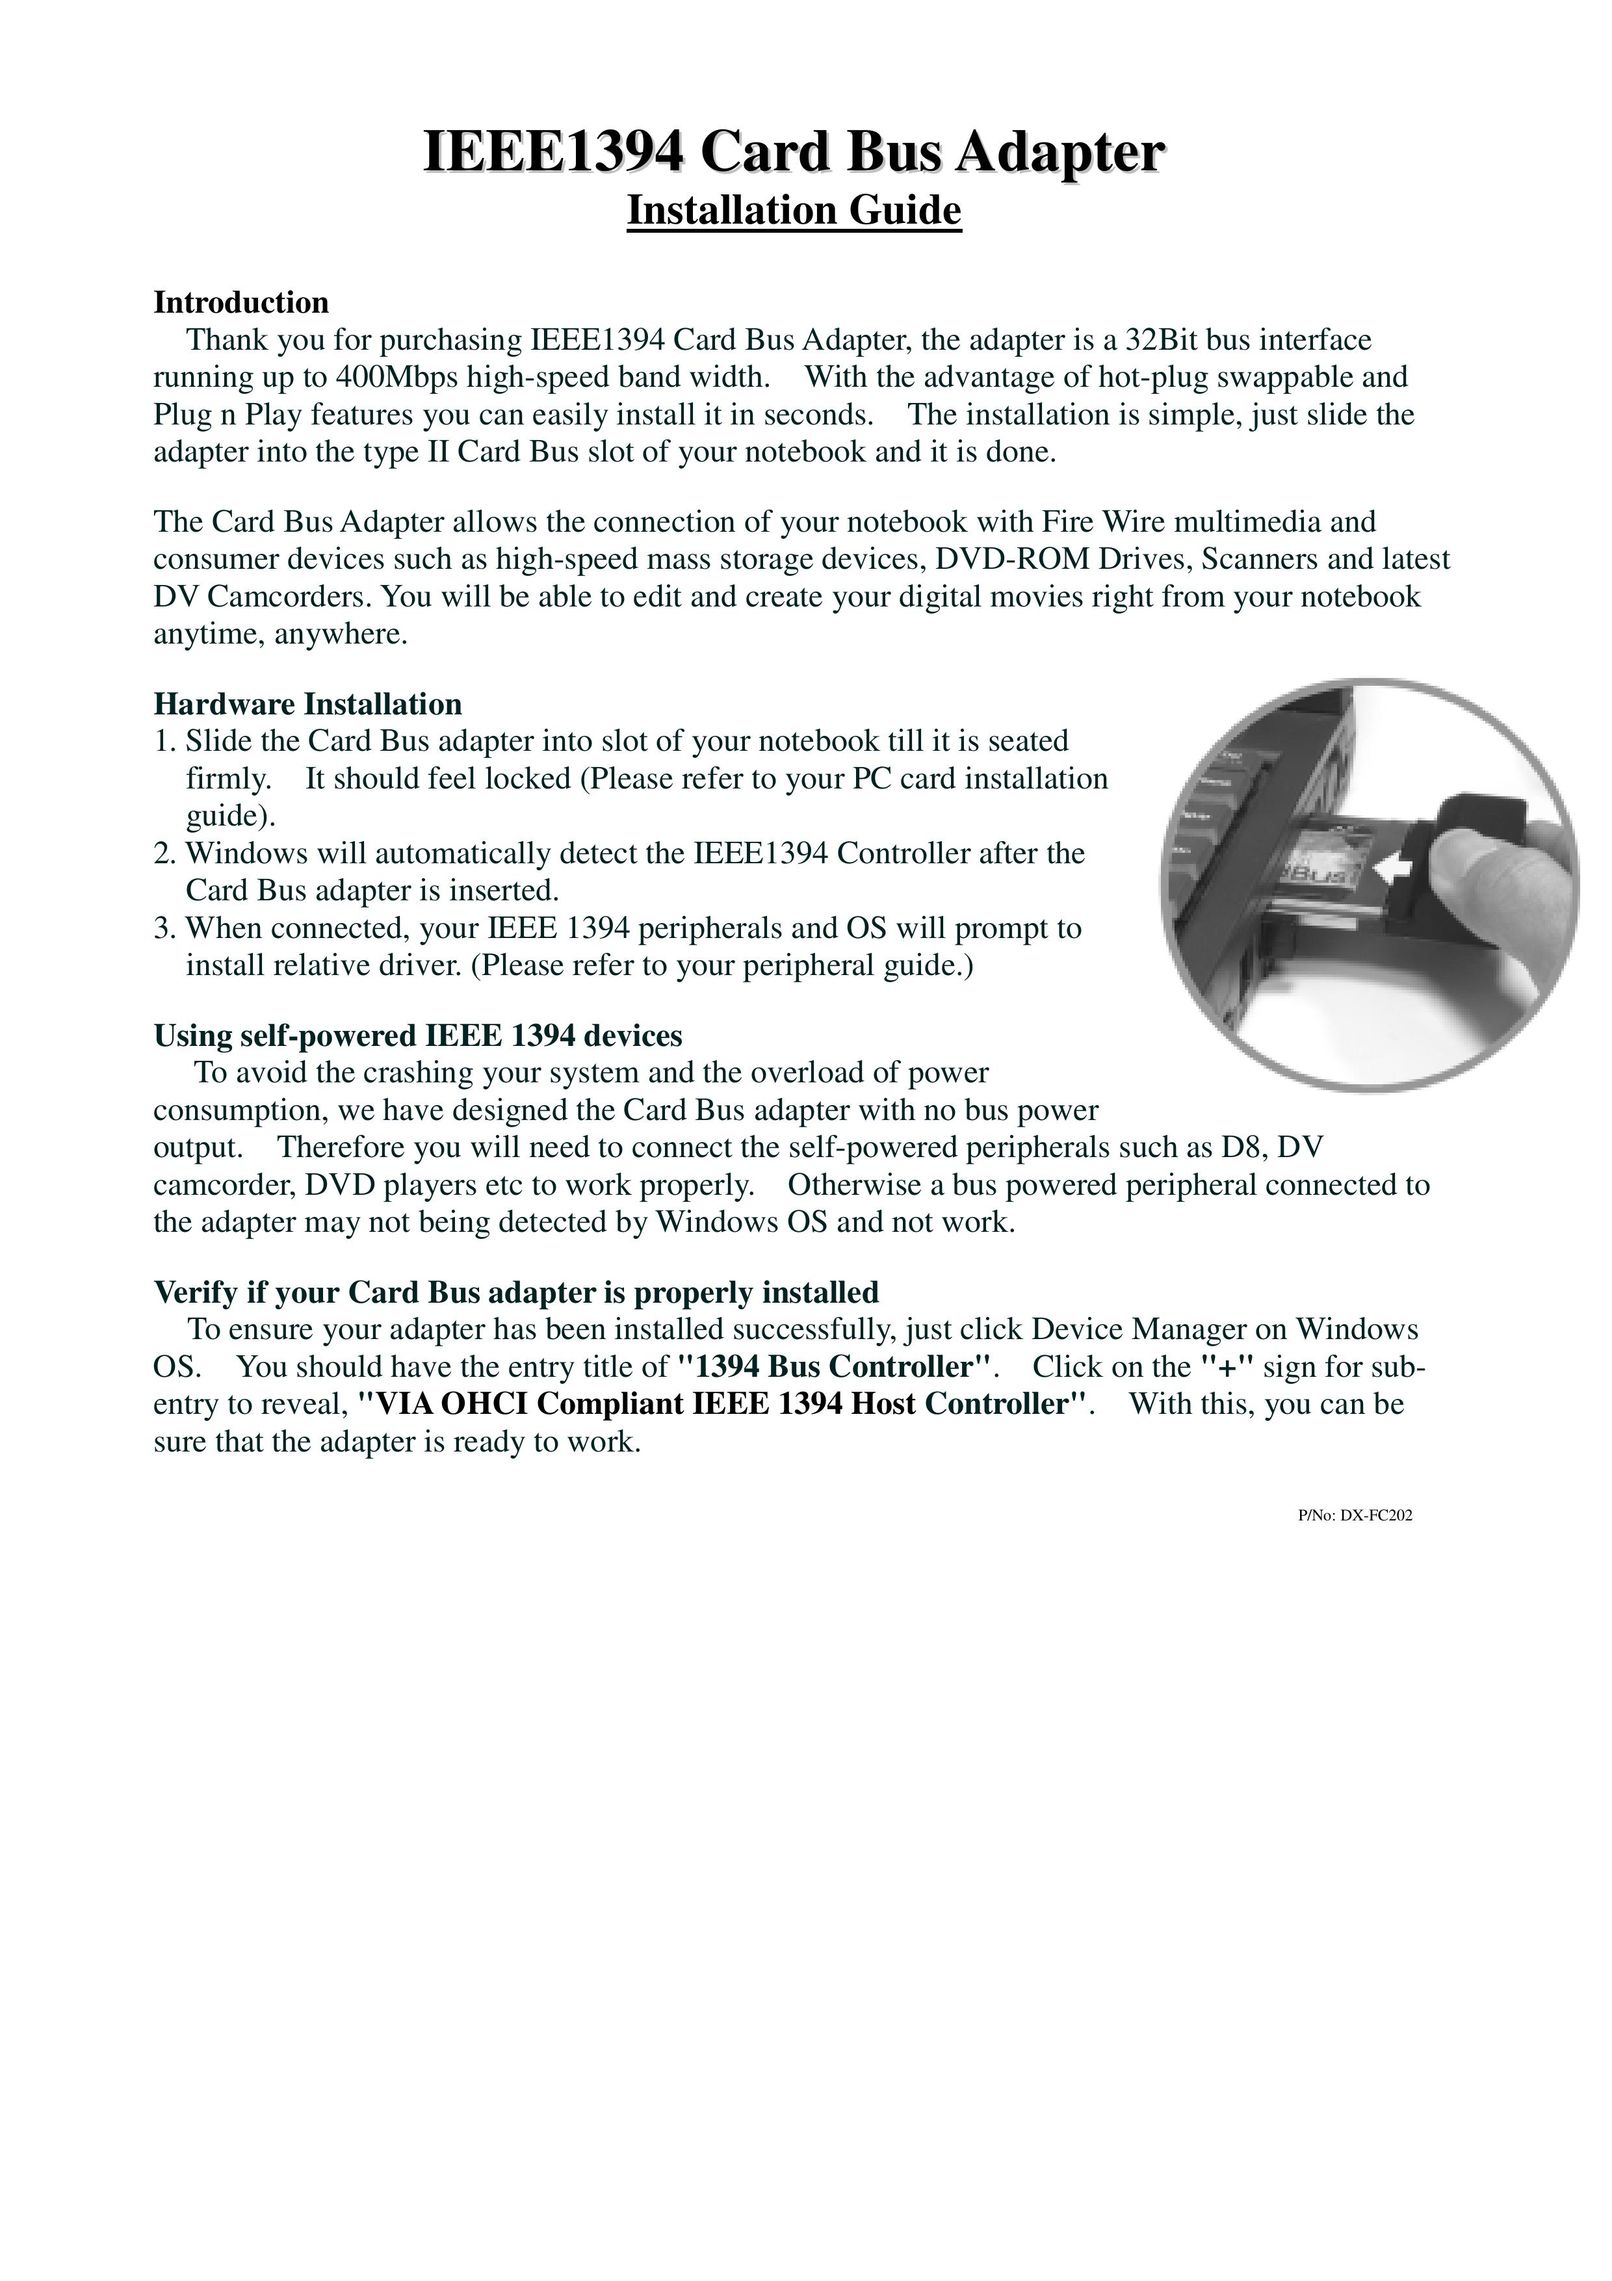 Dynex DX-FC202 Network Card User Manual (Page 1)